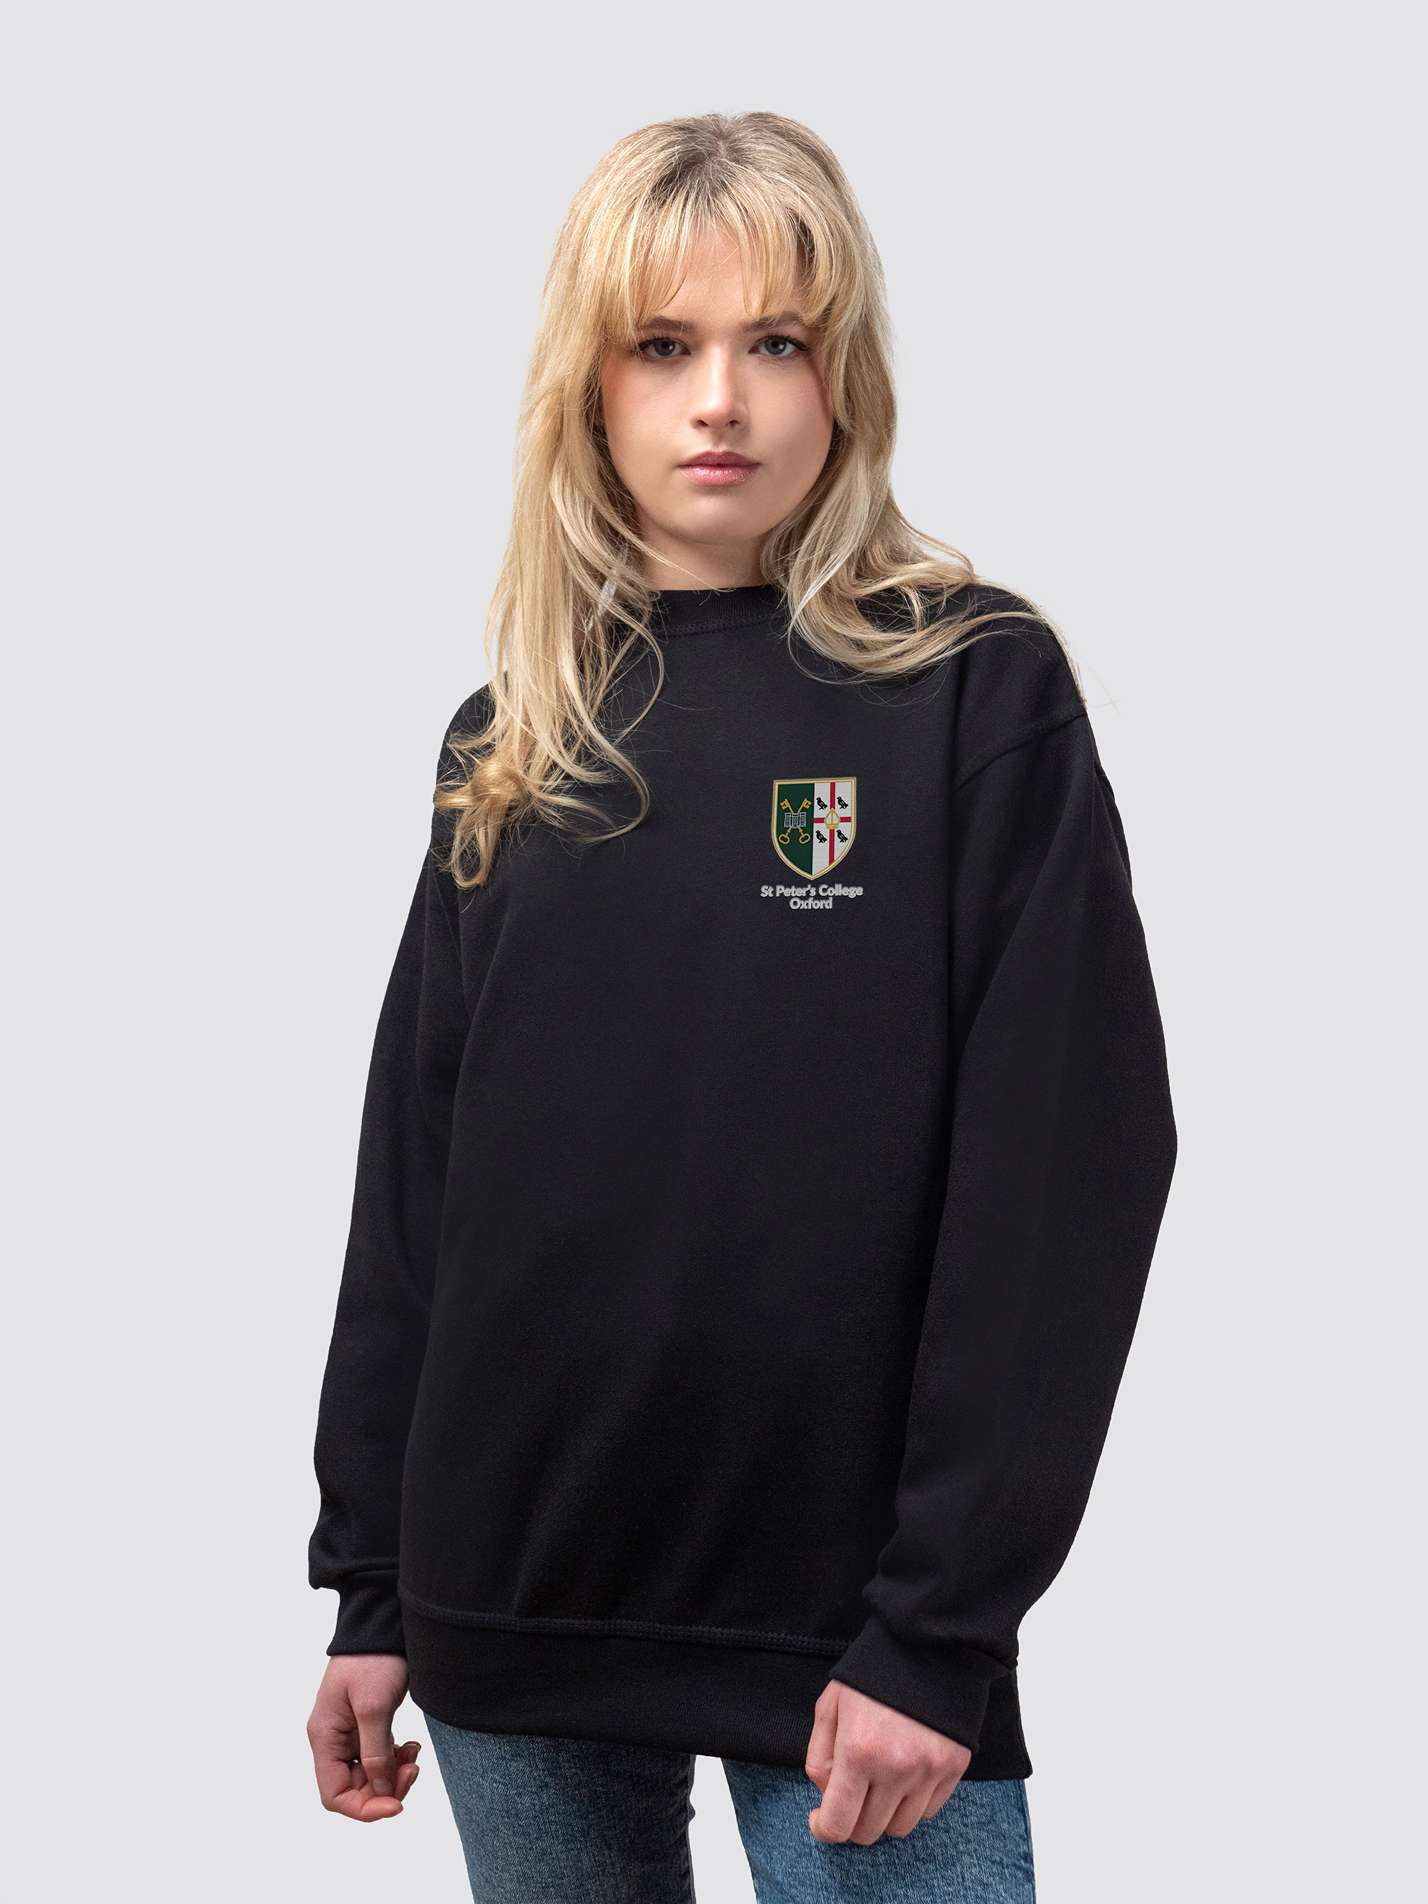 St Peter's crest on the front of a black, crew-neck sweatshirt 